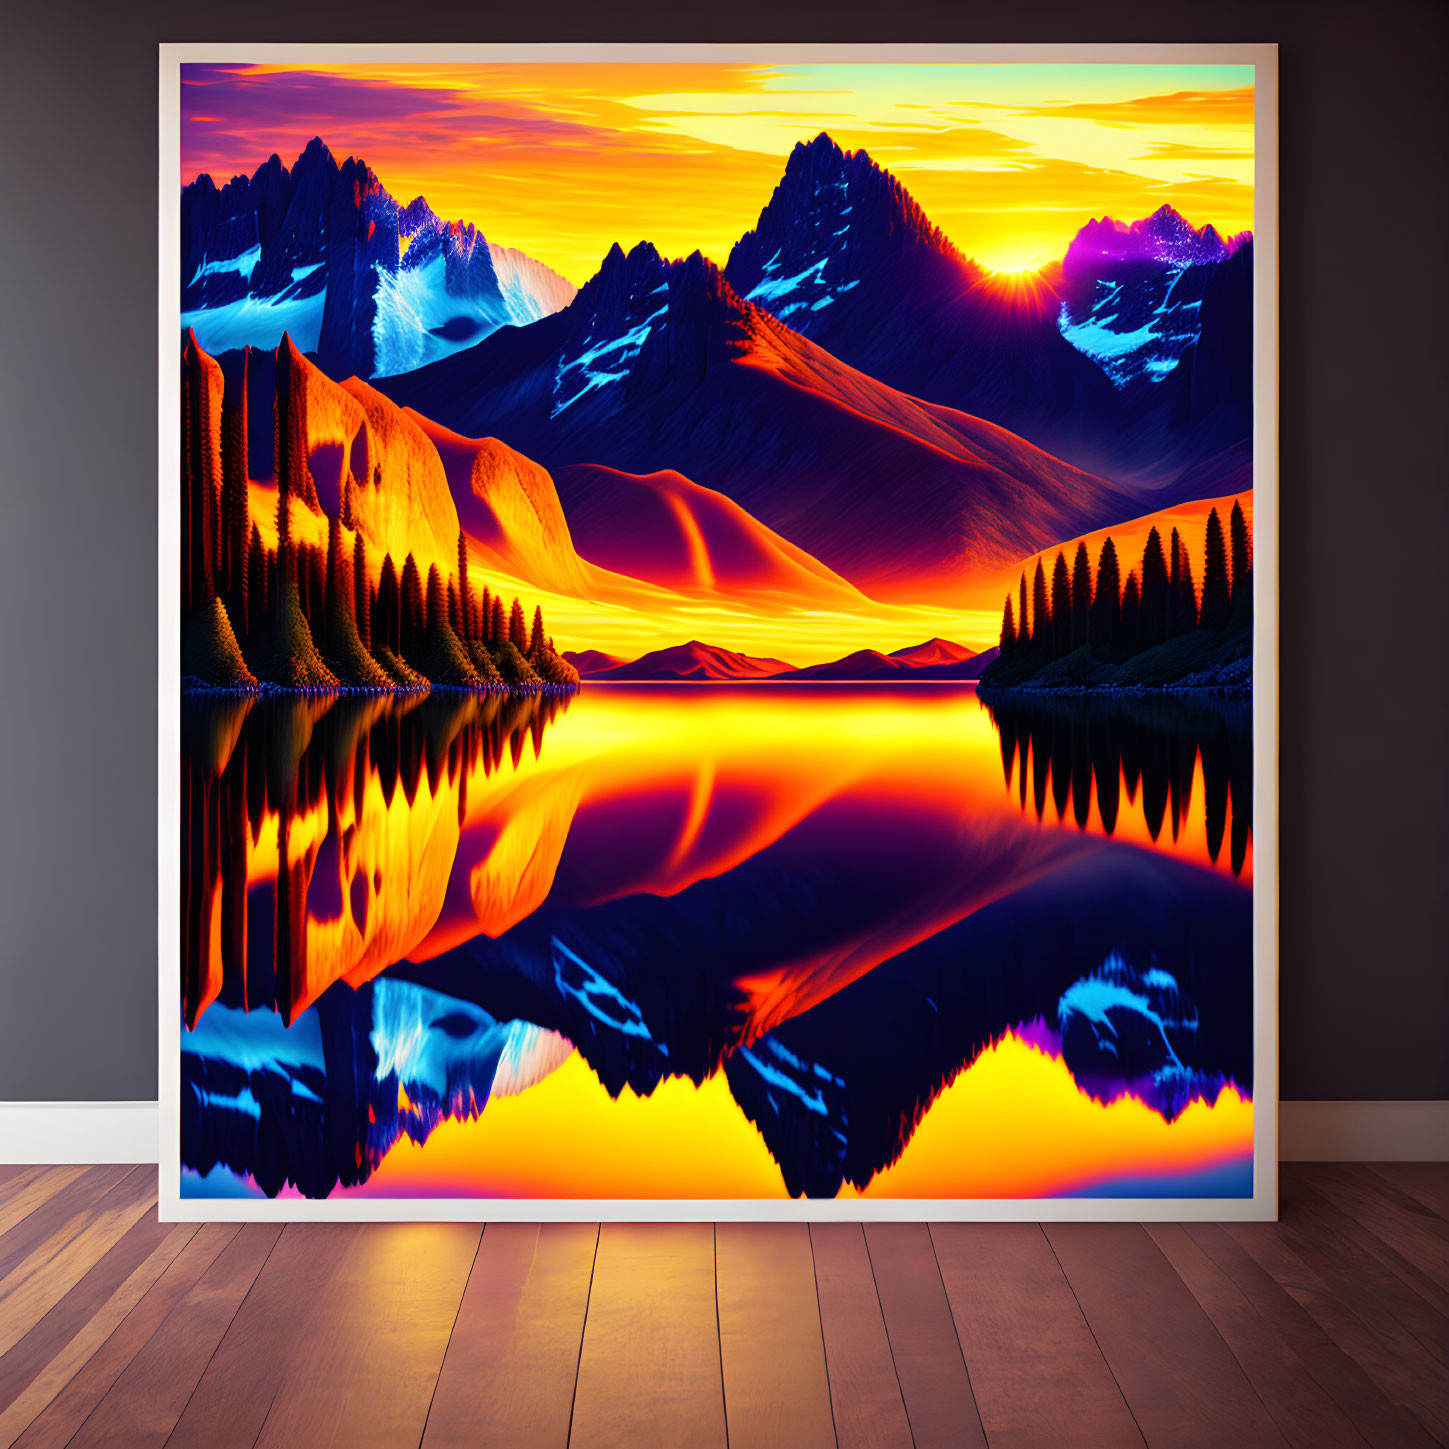 Colorful Mountain Reflection Painting at Sunset on Easel